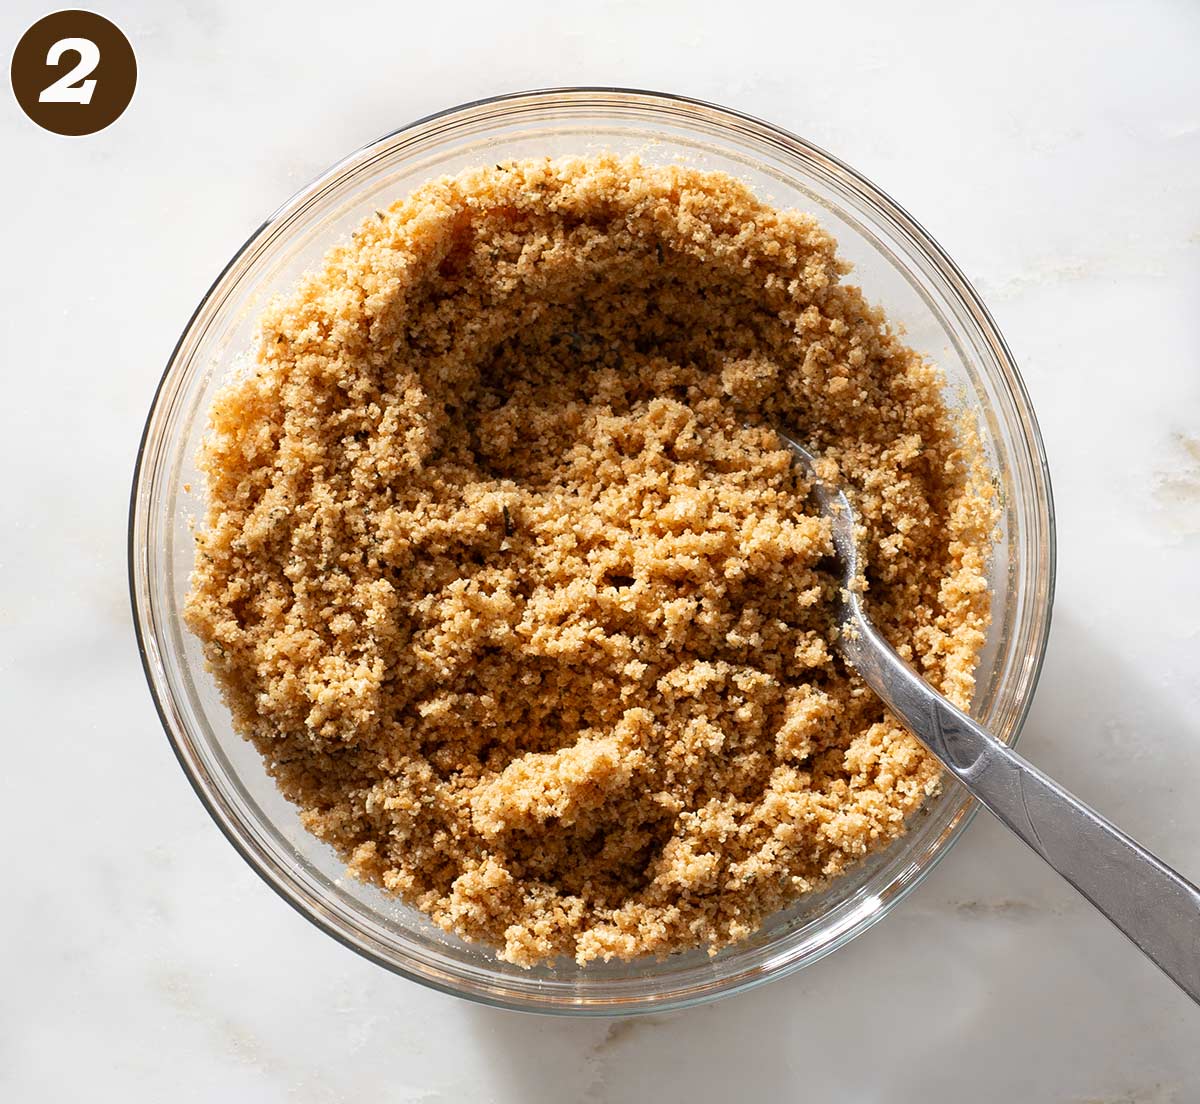 Crushed graham crackers being stirred in a bowl.